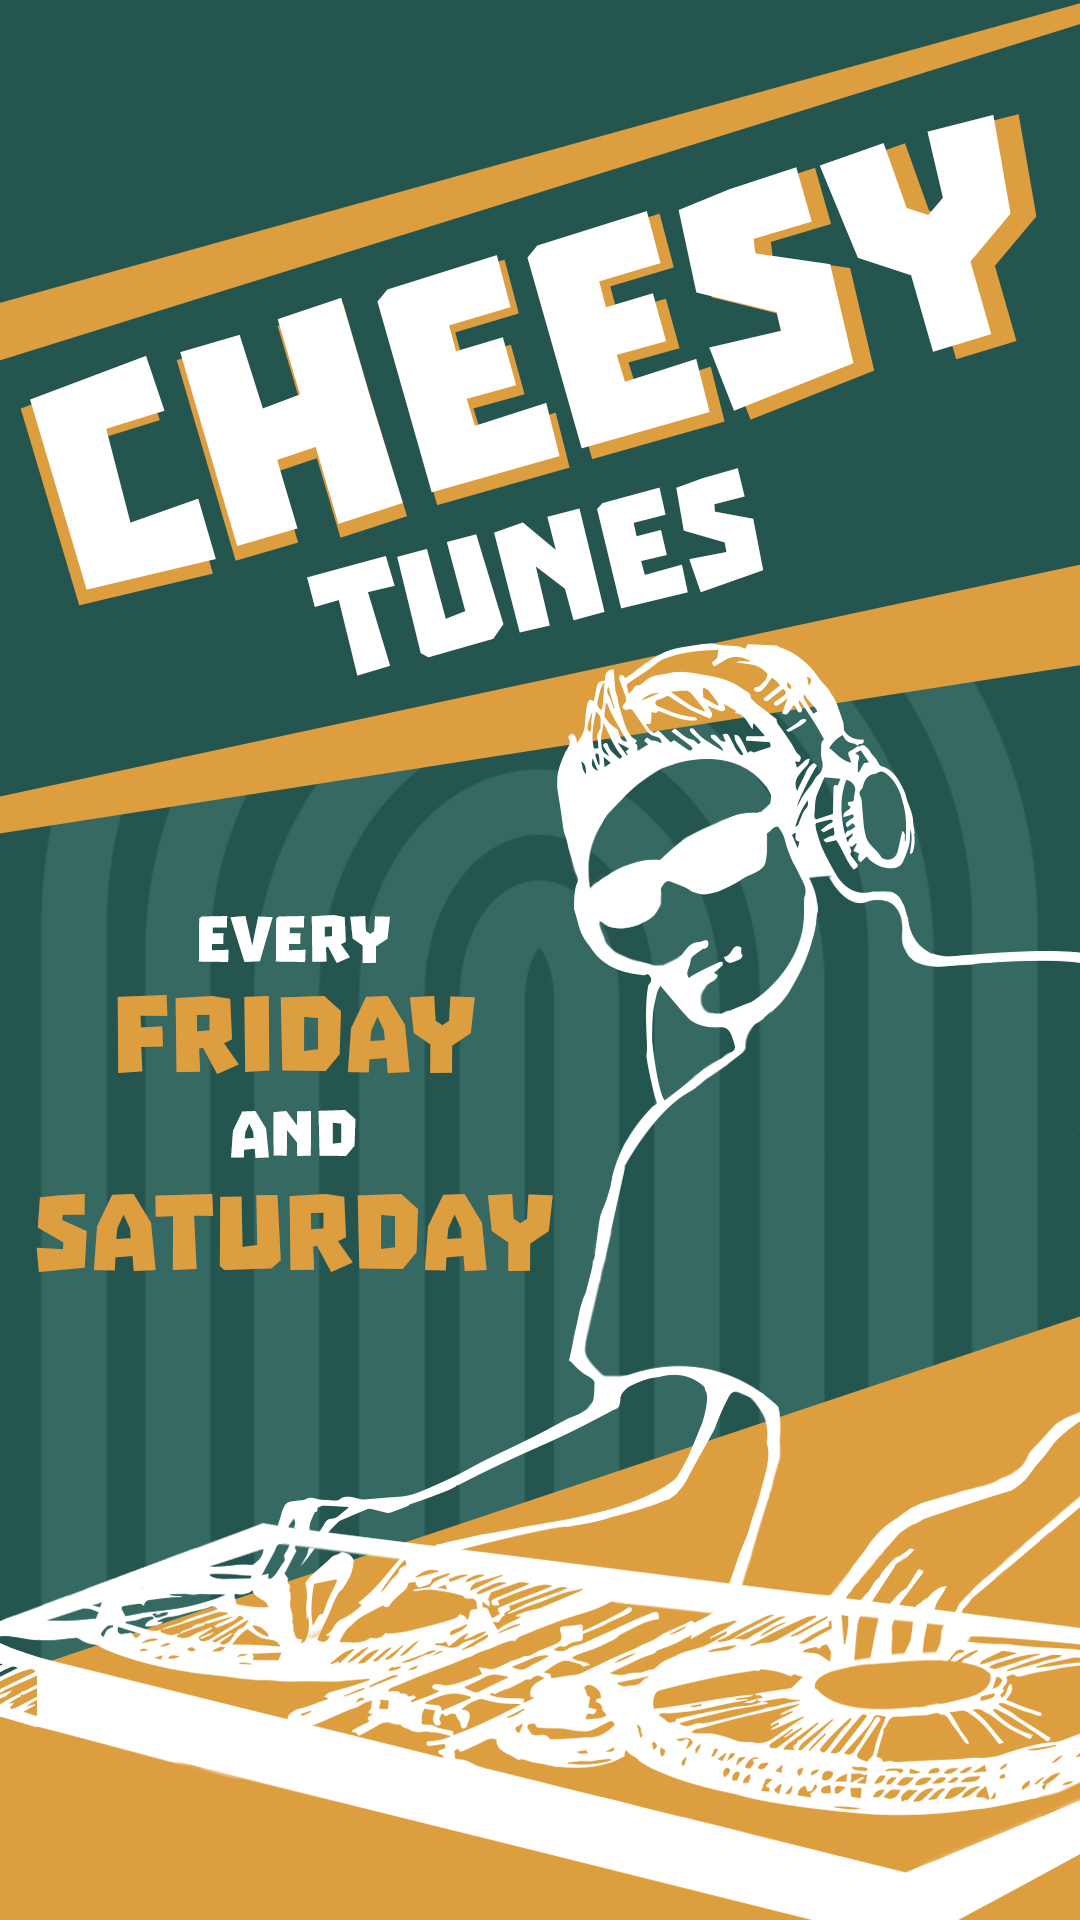 Cheesy tunes st Friday & Saturday_square formaat